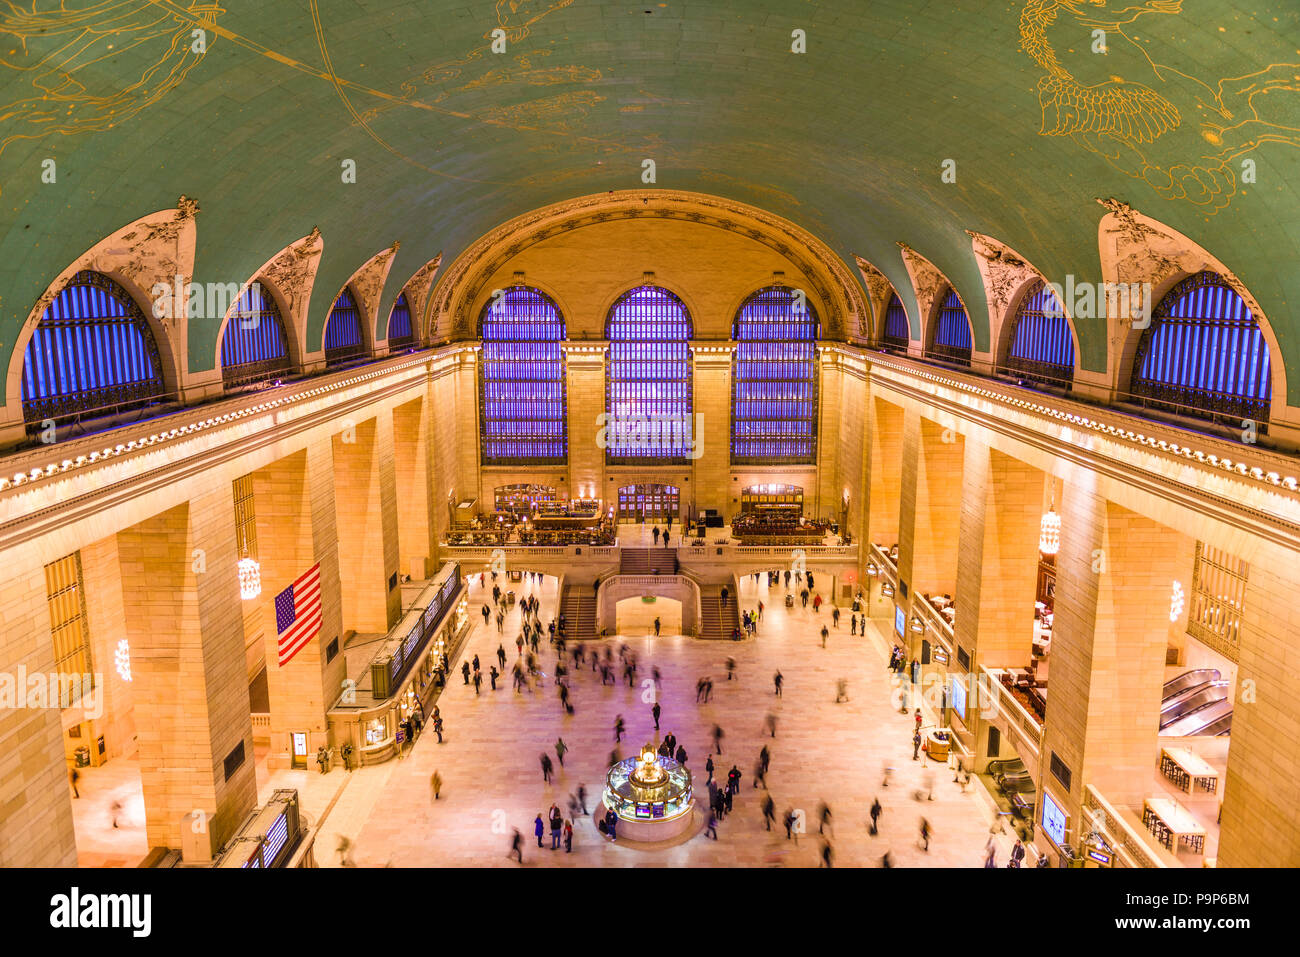 NEW YORK, NEW YORK - OCTOBER 20, 2016: The interior of Grand Central Terminal from above. Stock Photo